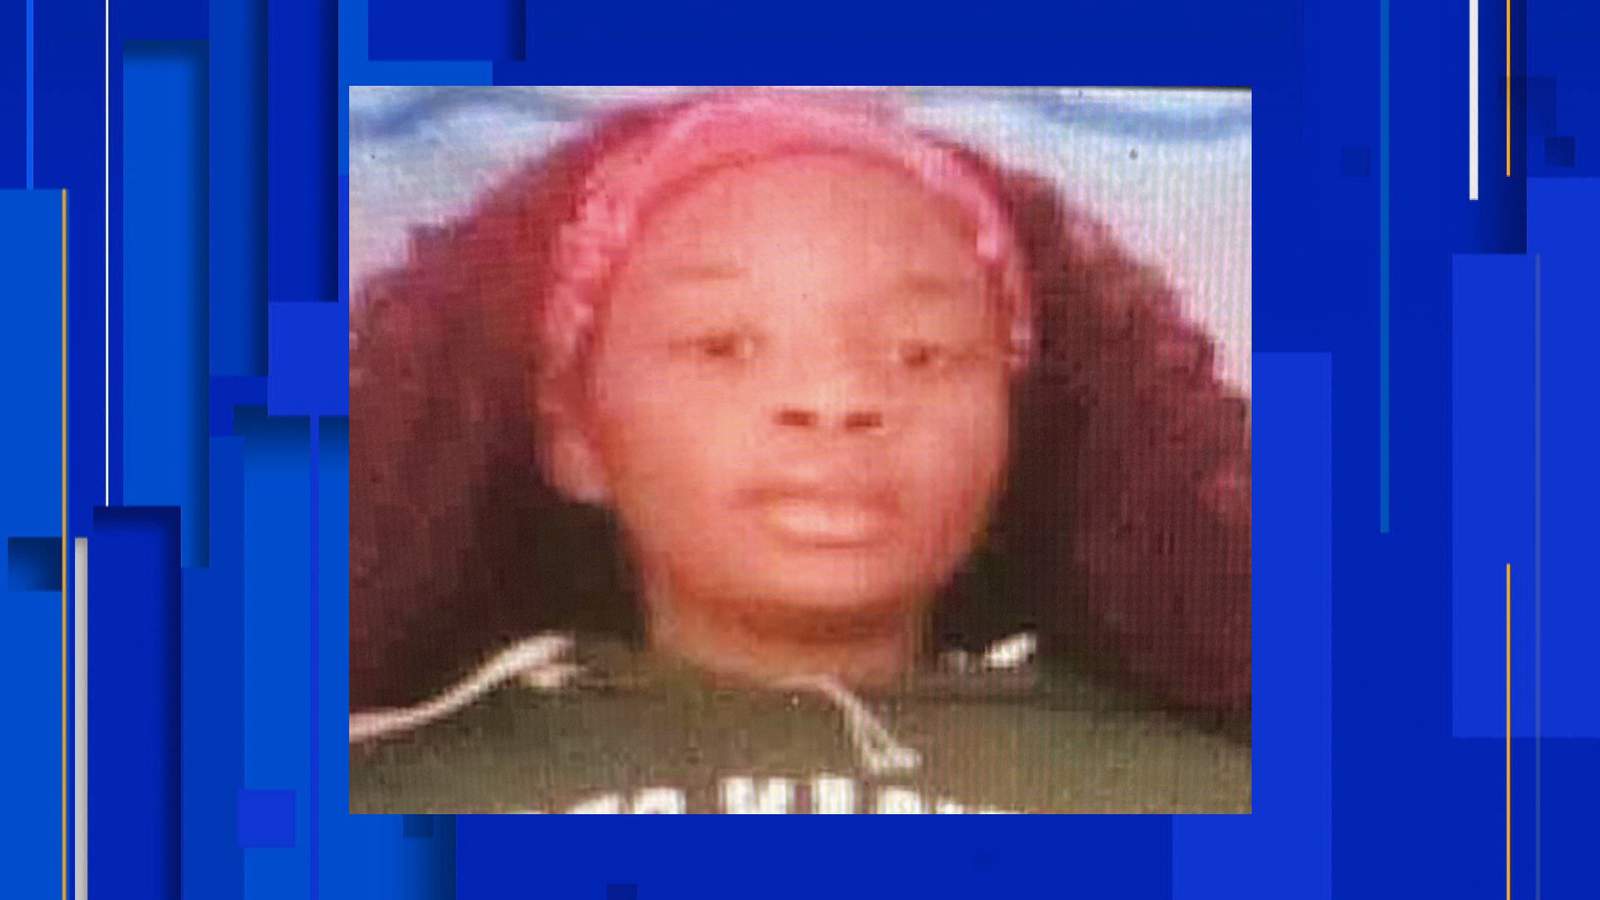 Detroit police searching for missing 16-year-old